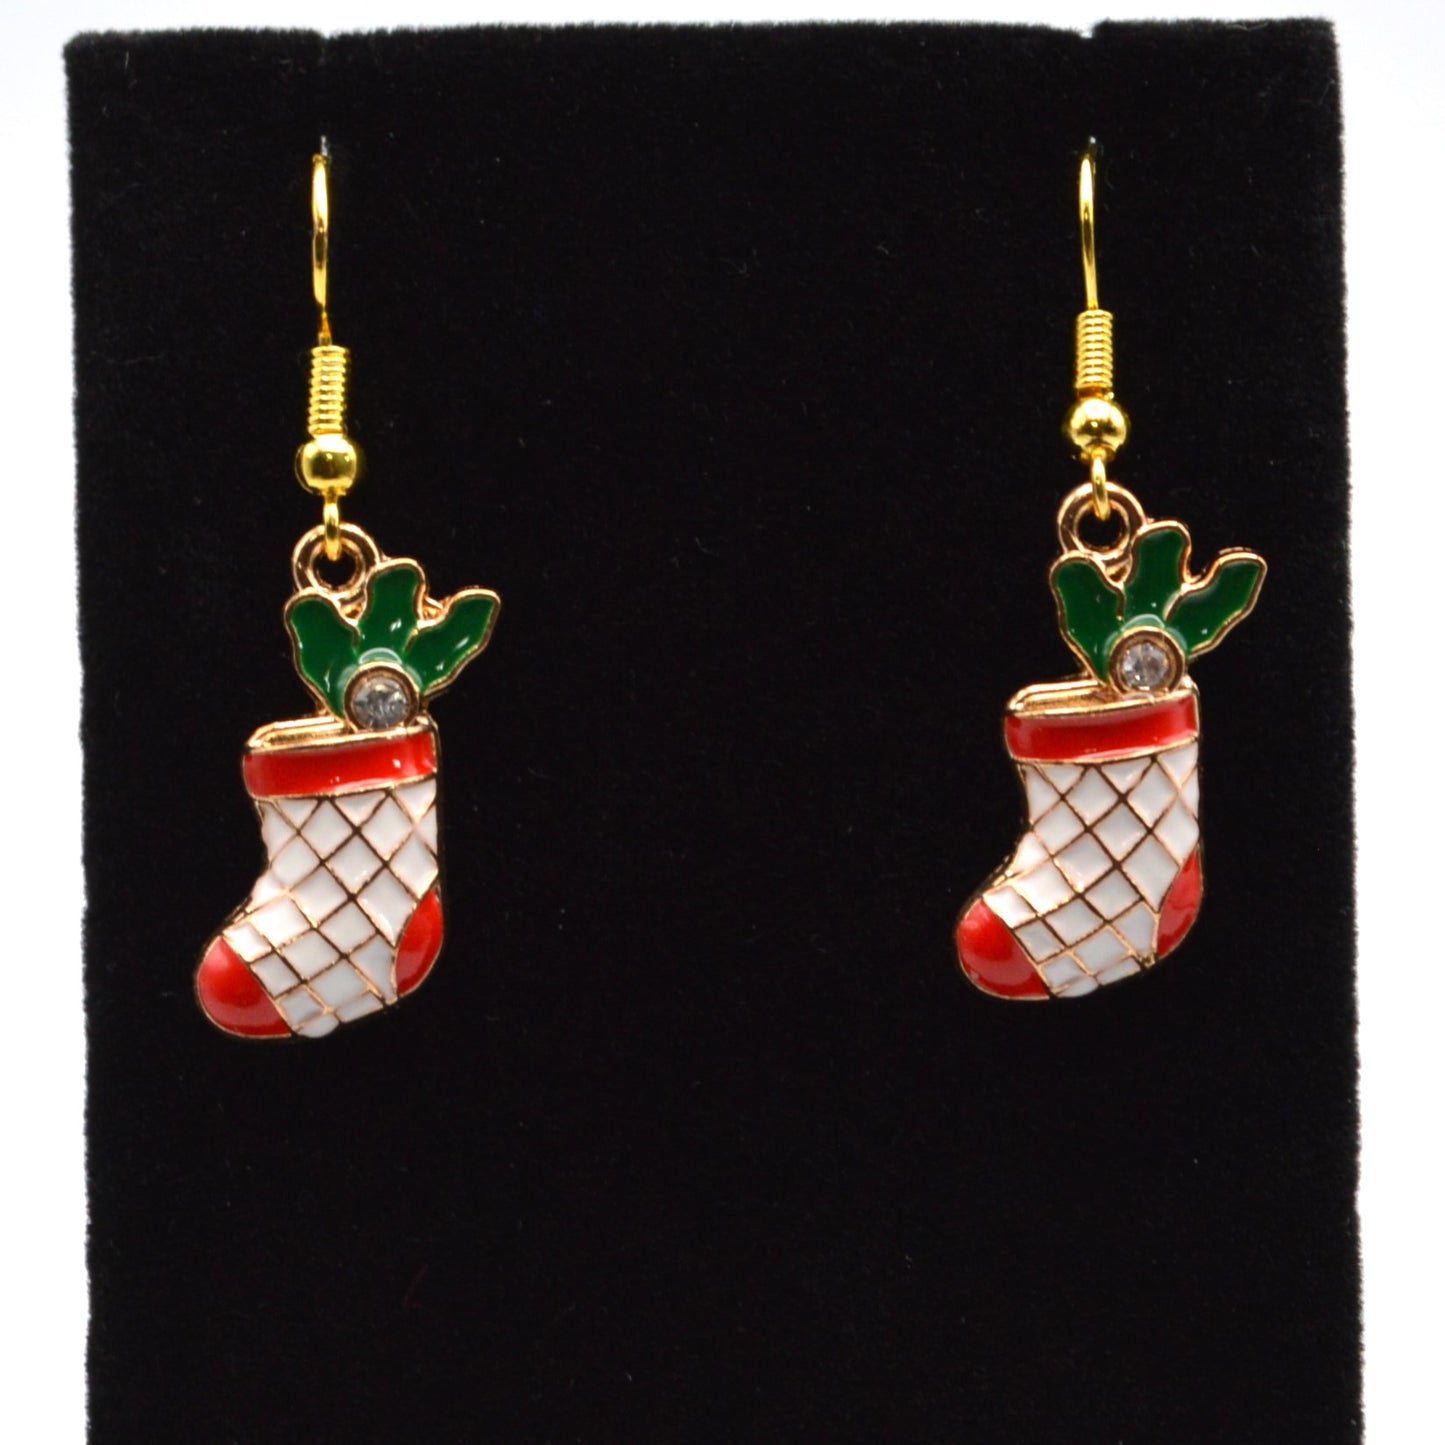 White and Red Stocking Earrings